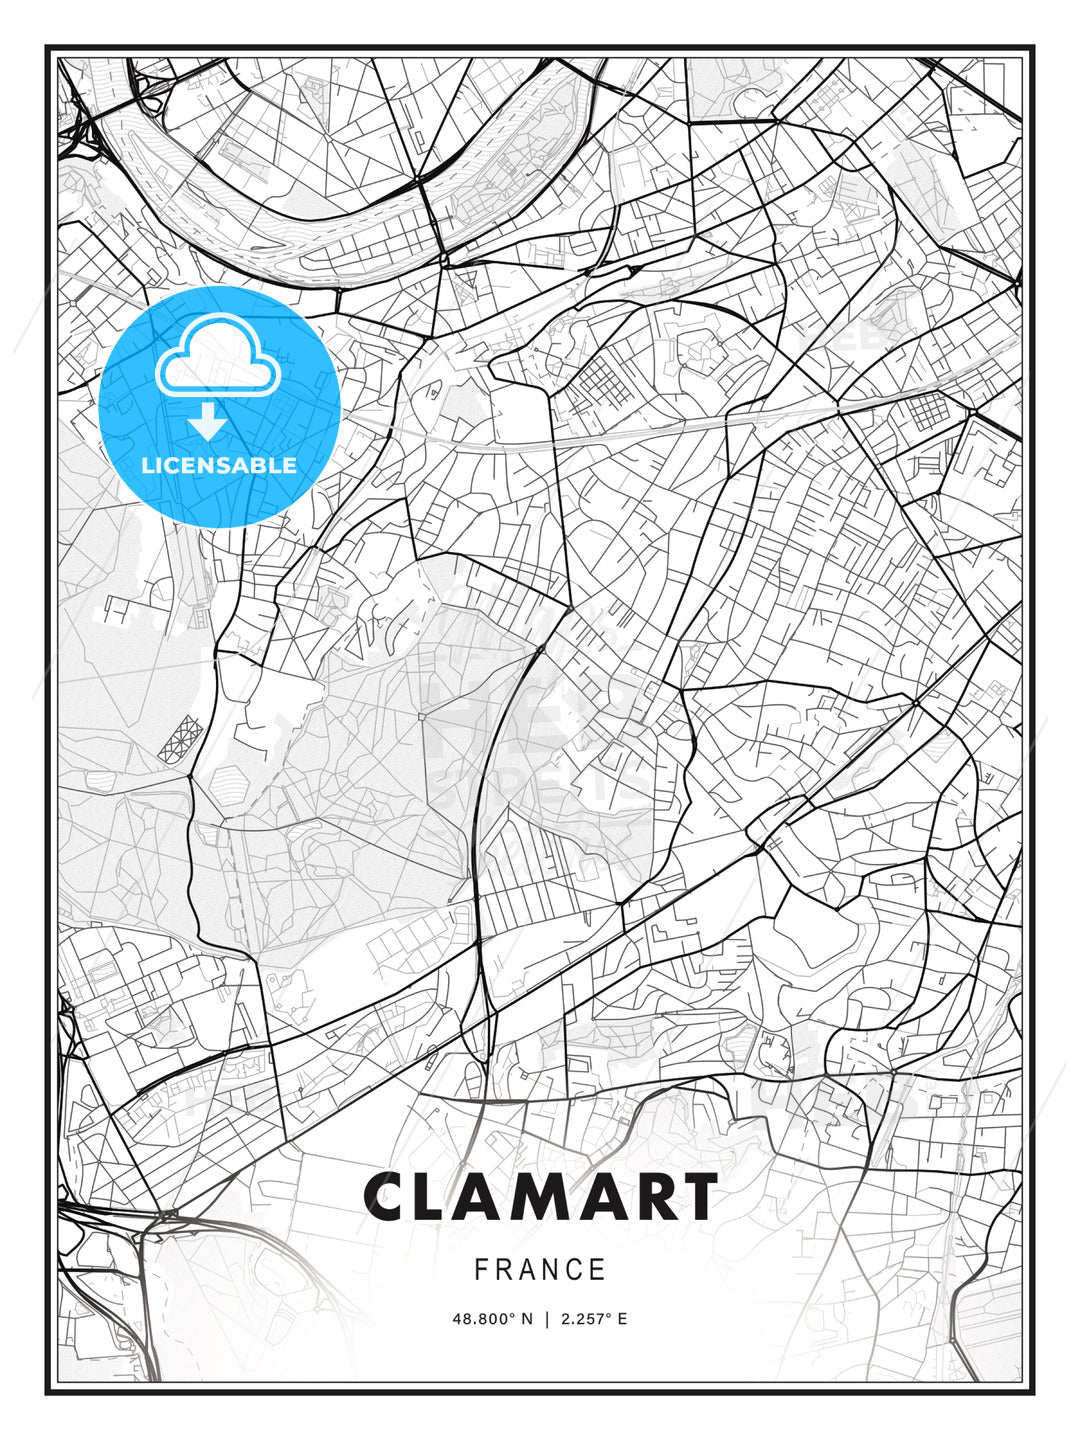 Clamart, France, Modern Print Template in Various Formats - HEBSTREITS Sketches